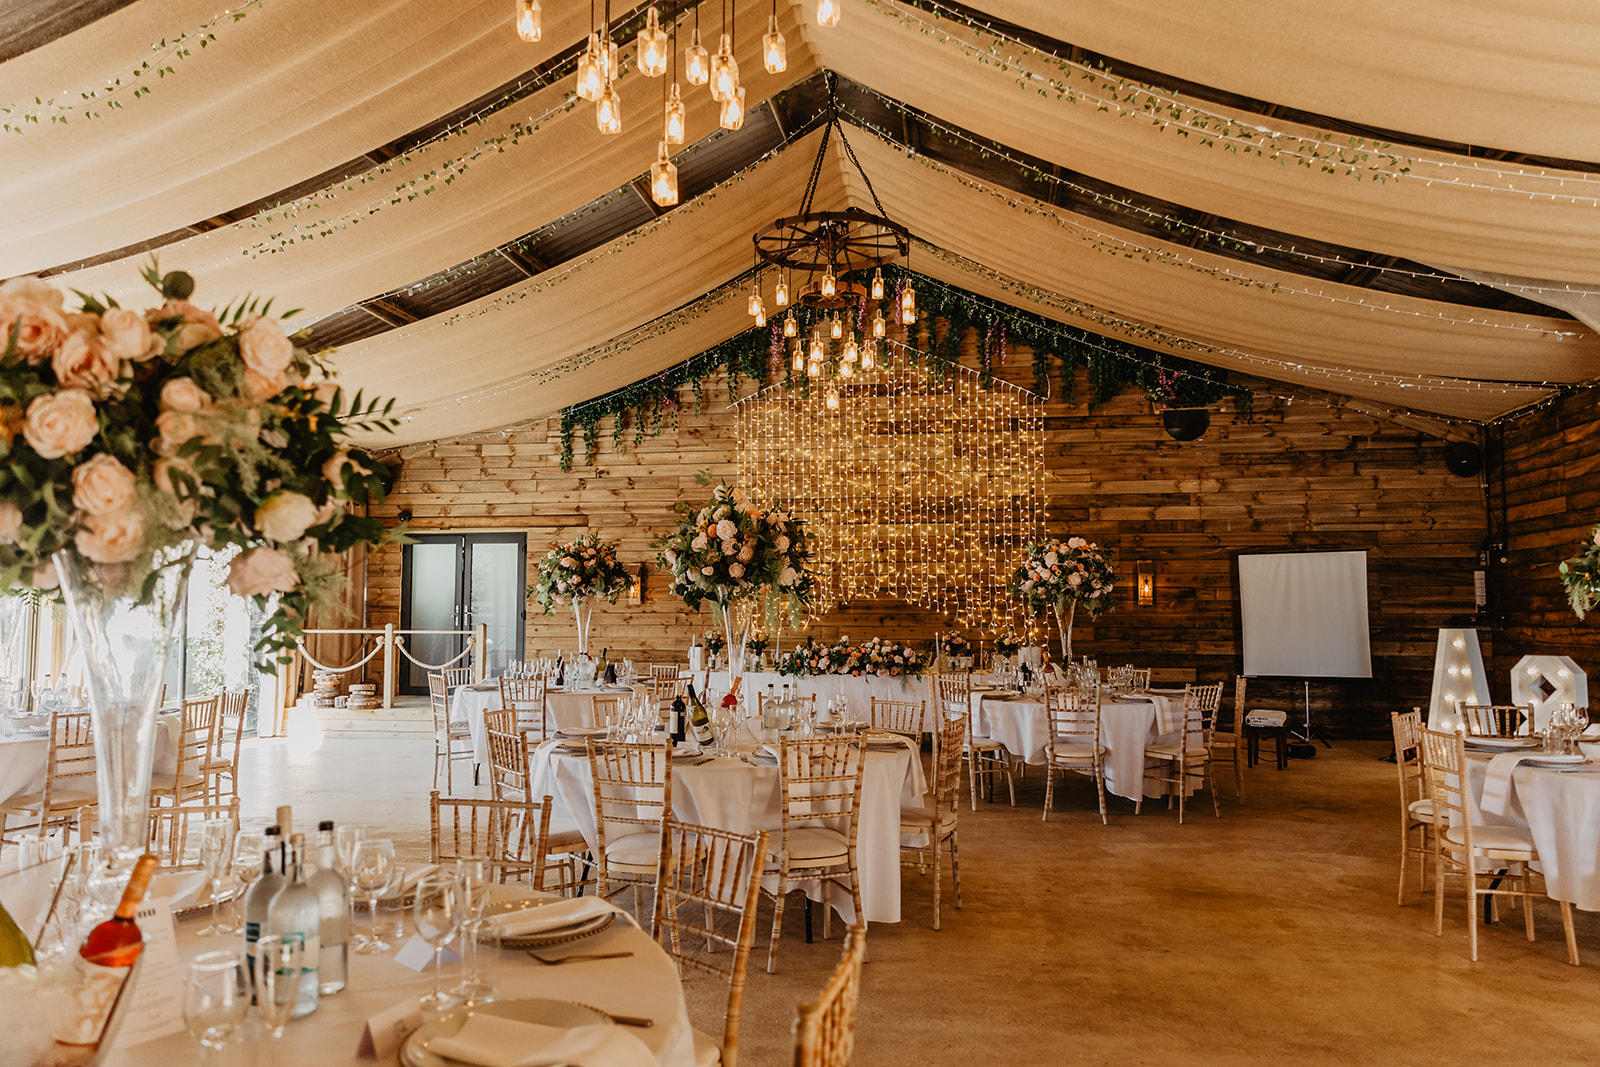 Wedding reception room at a Southlands barn wedding, Sussex. Photo by OliveJoy Photography.